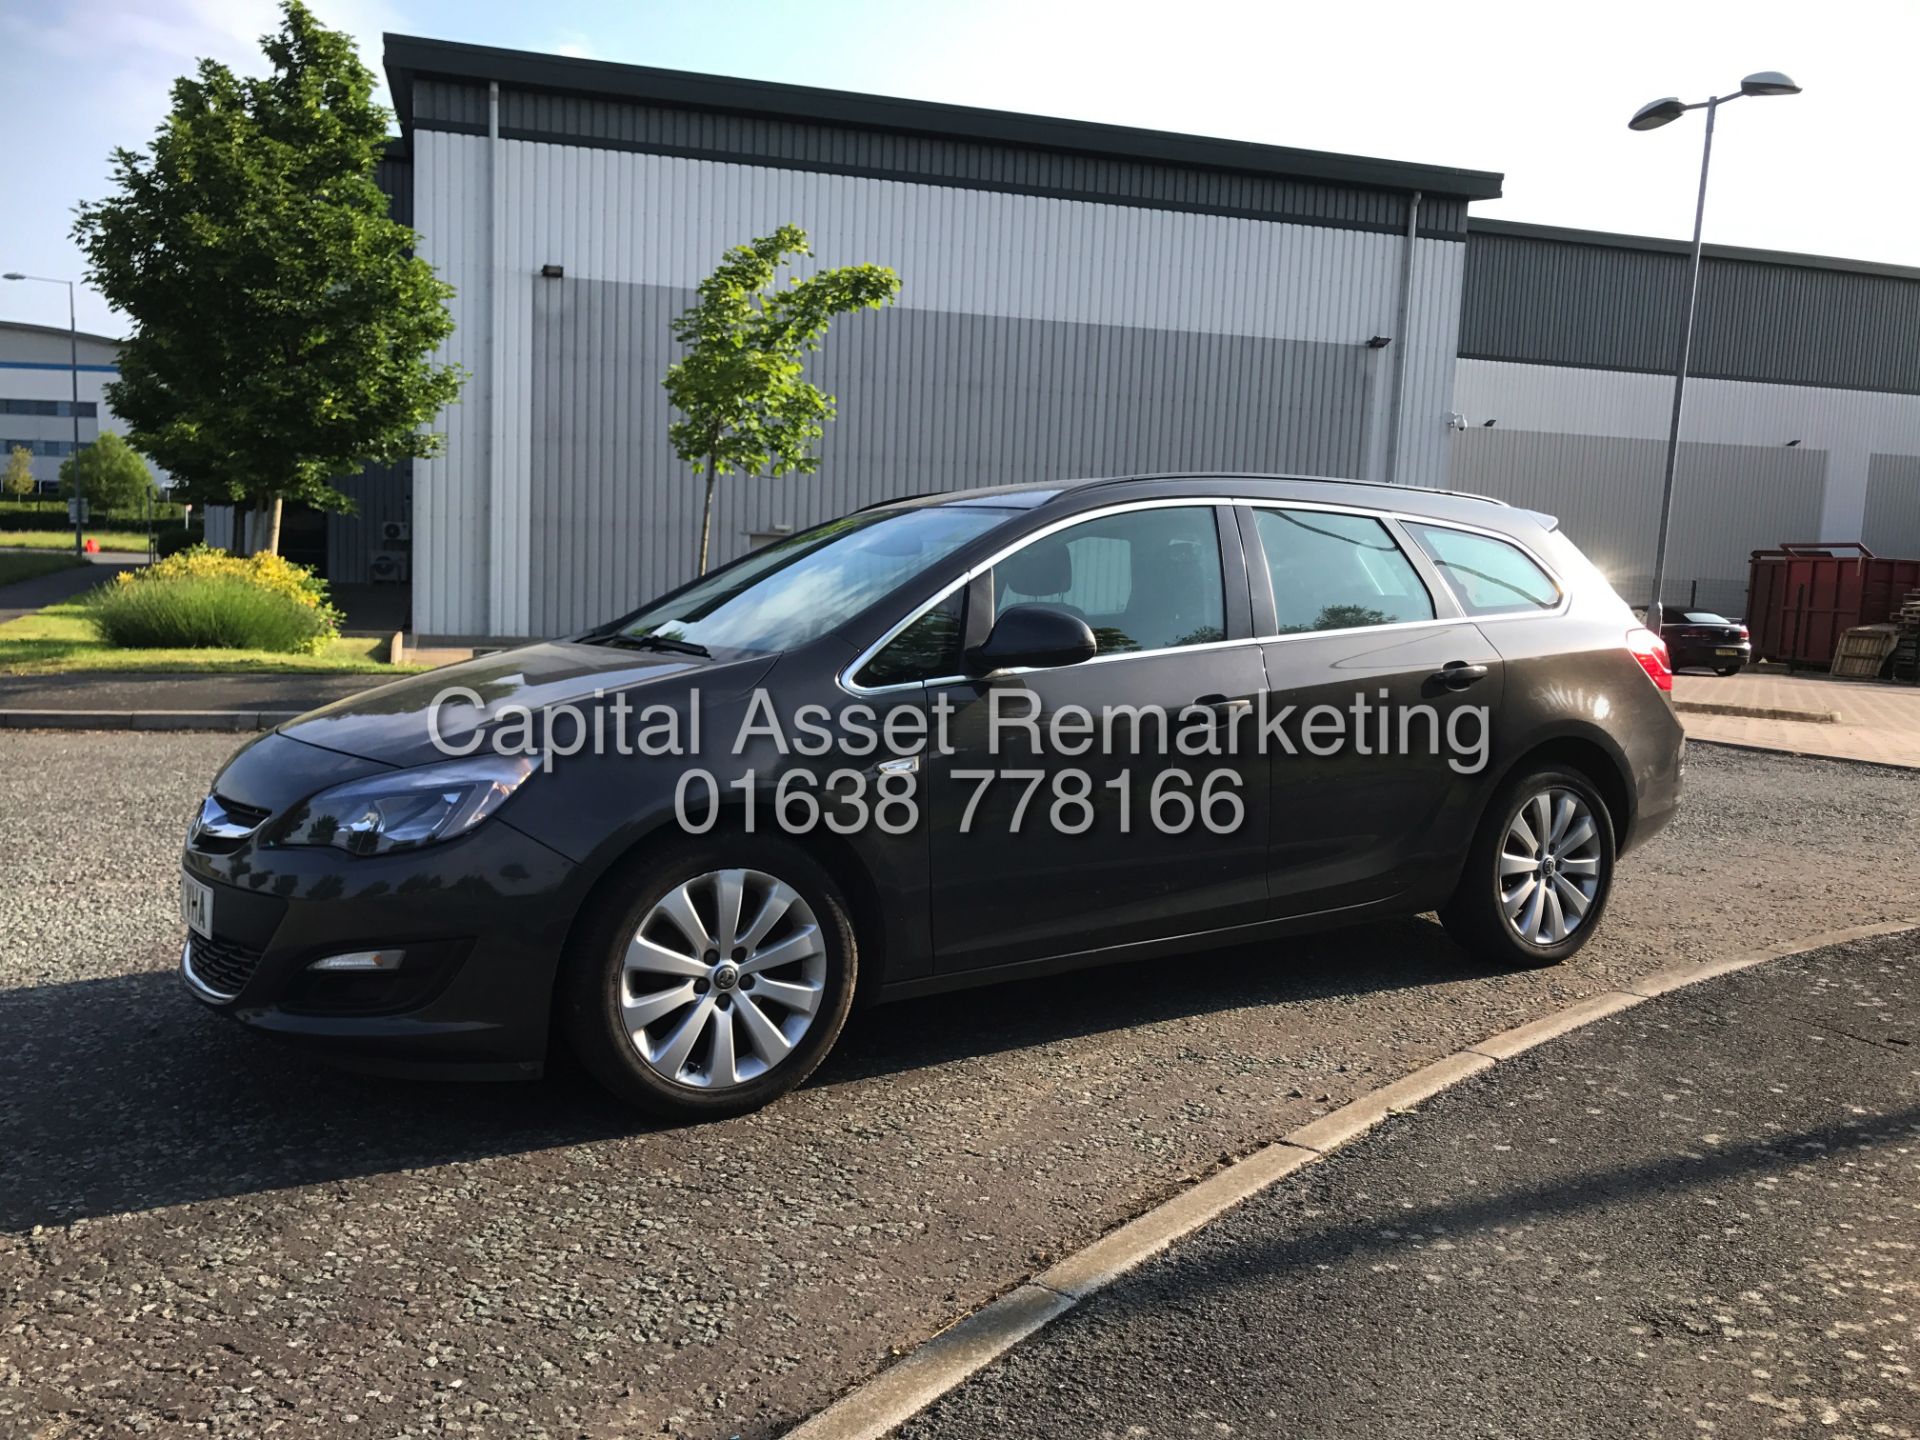 On Sale VAUXHALL ASTRA 1.3CDTI "TECH LINE" ESTATE (2013 MODEL) 1 OWNER WITH HISTORY SAT NAV AIR CON - Image 5 of 20